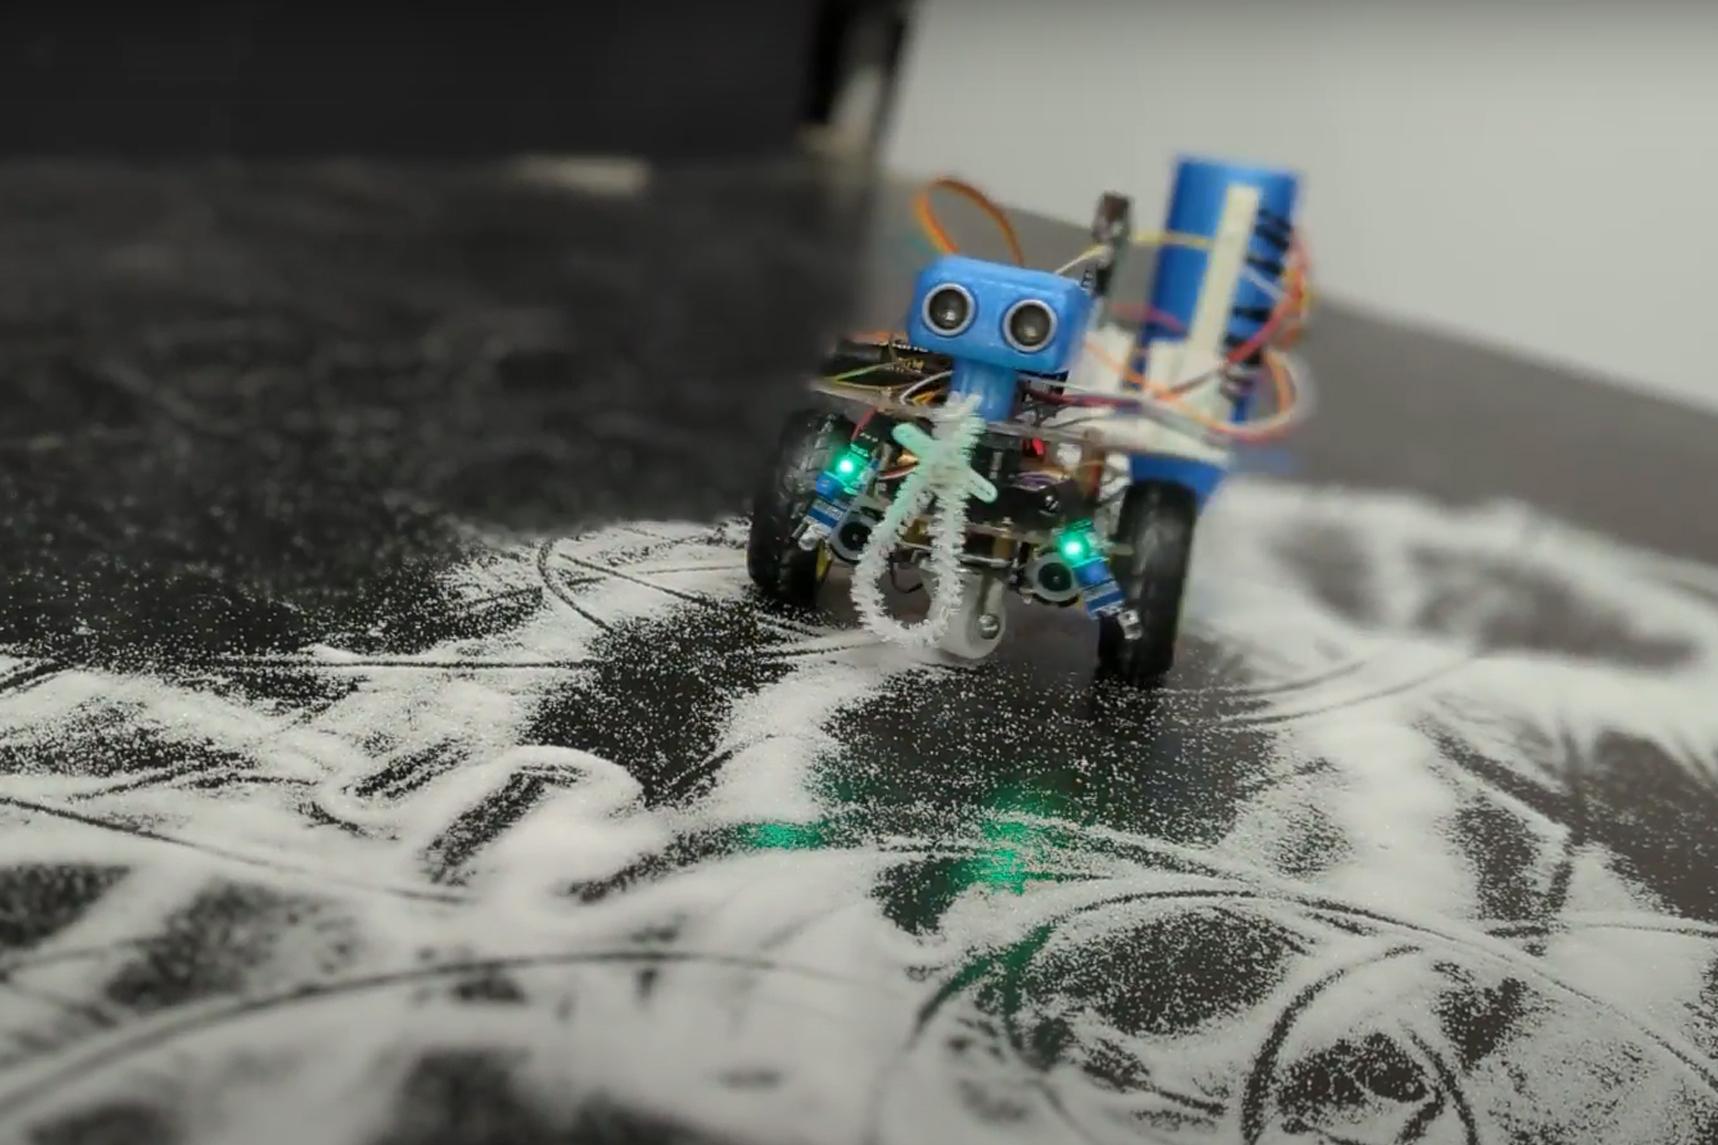 The Whimsy Artist is a small robot that both creates and destroys art